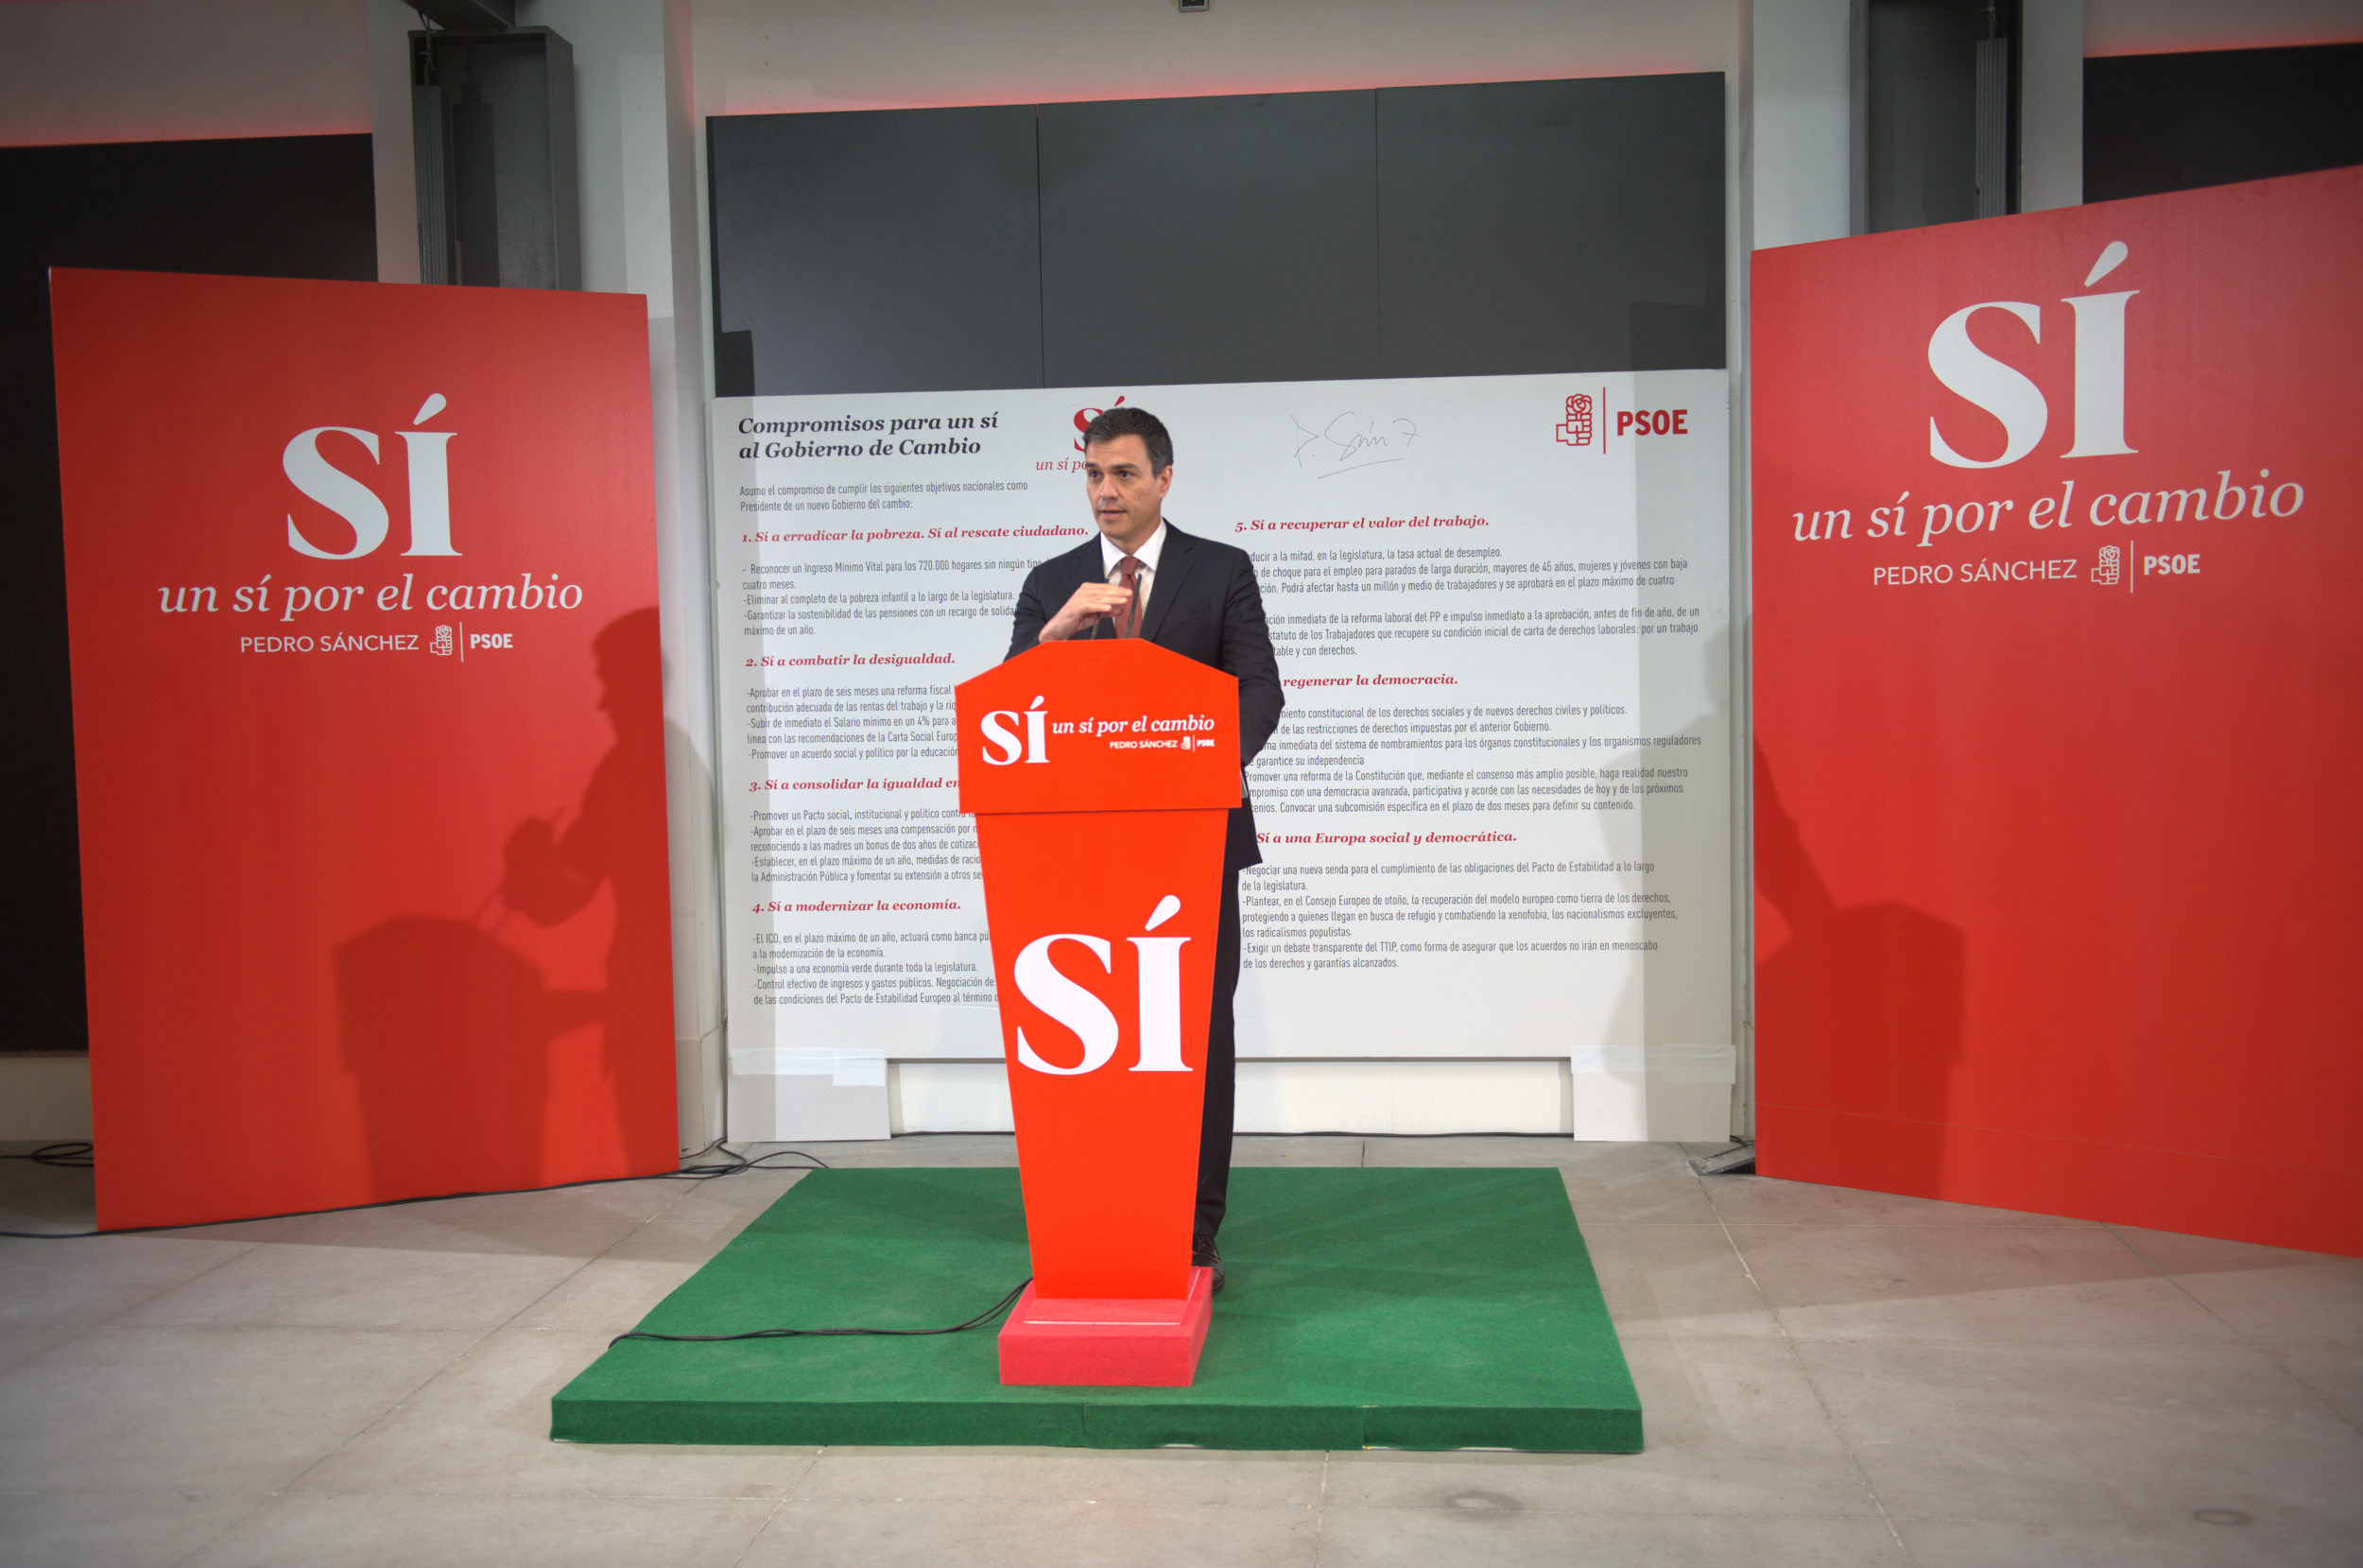 PSOE's leader, Pedro Sánchez, presented the document “Commitments for a ‘yes’ to the government of change” (by ACN)